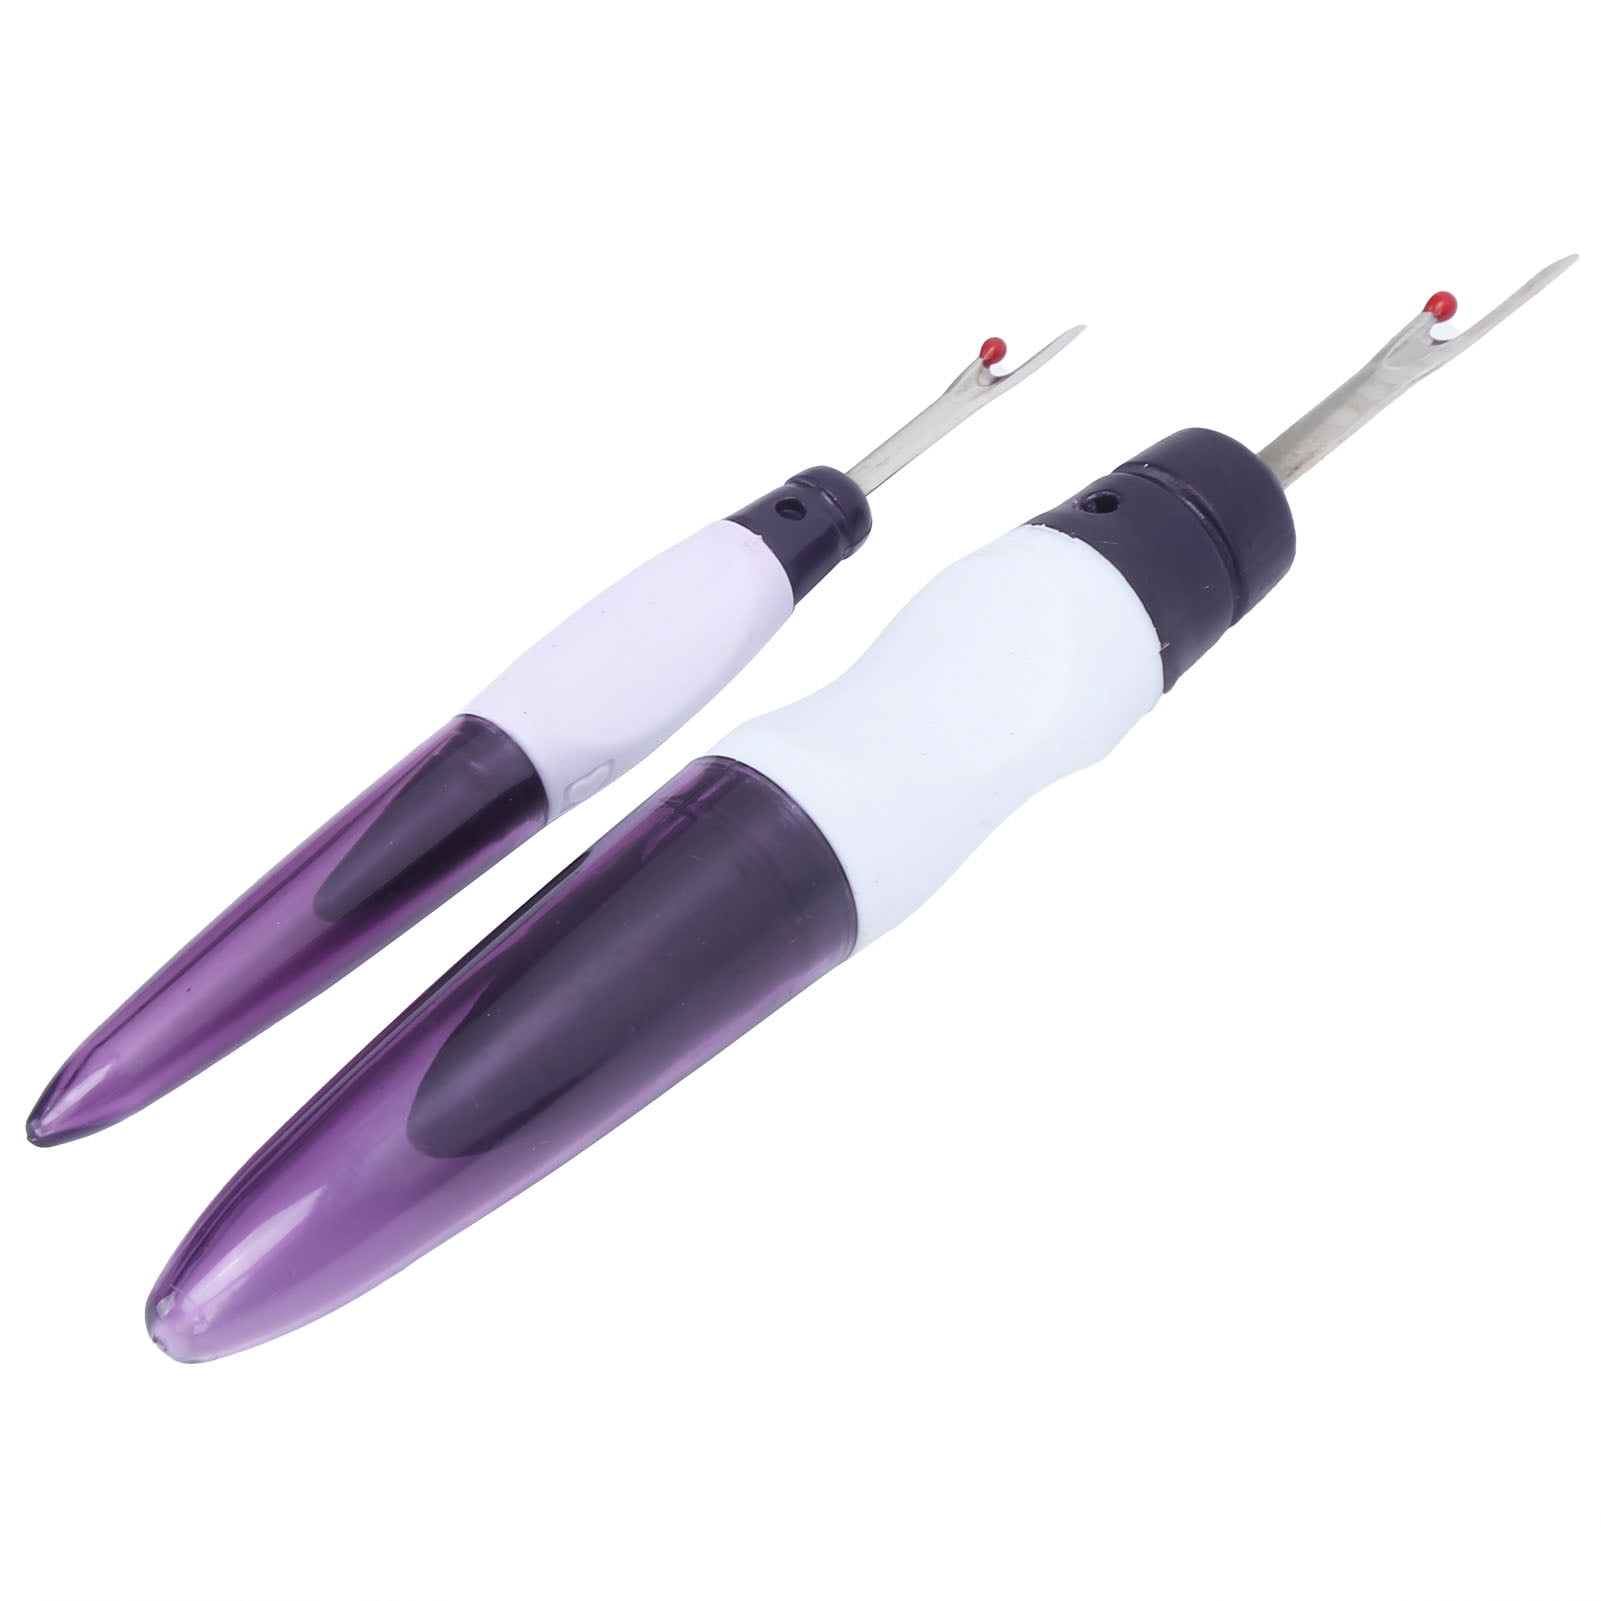 Senjay Thread Puller,2pcs Seam Ripper Large Small Embroidery